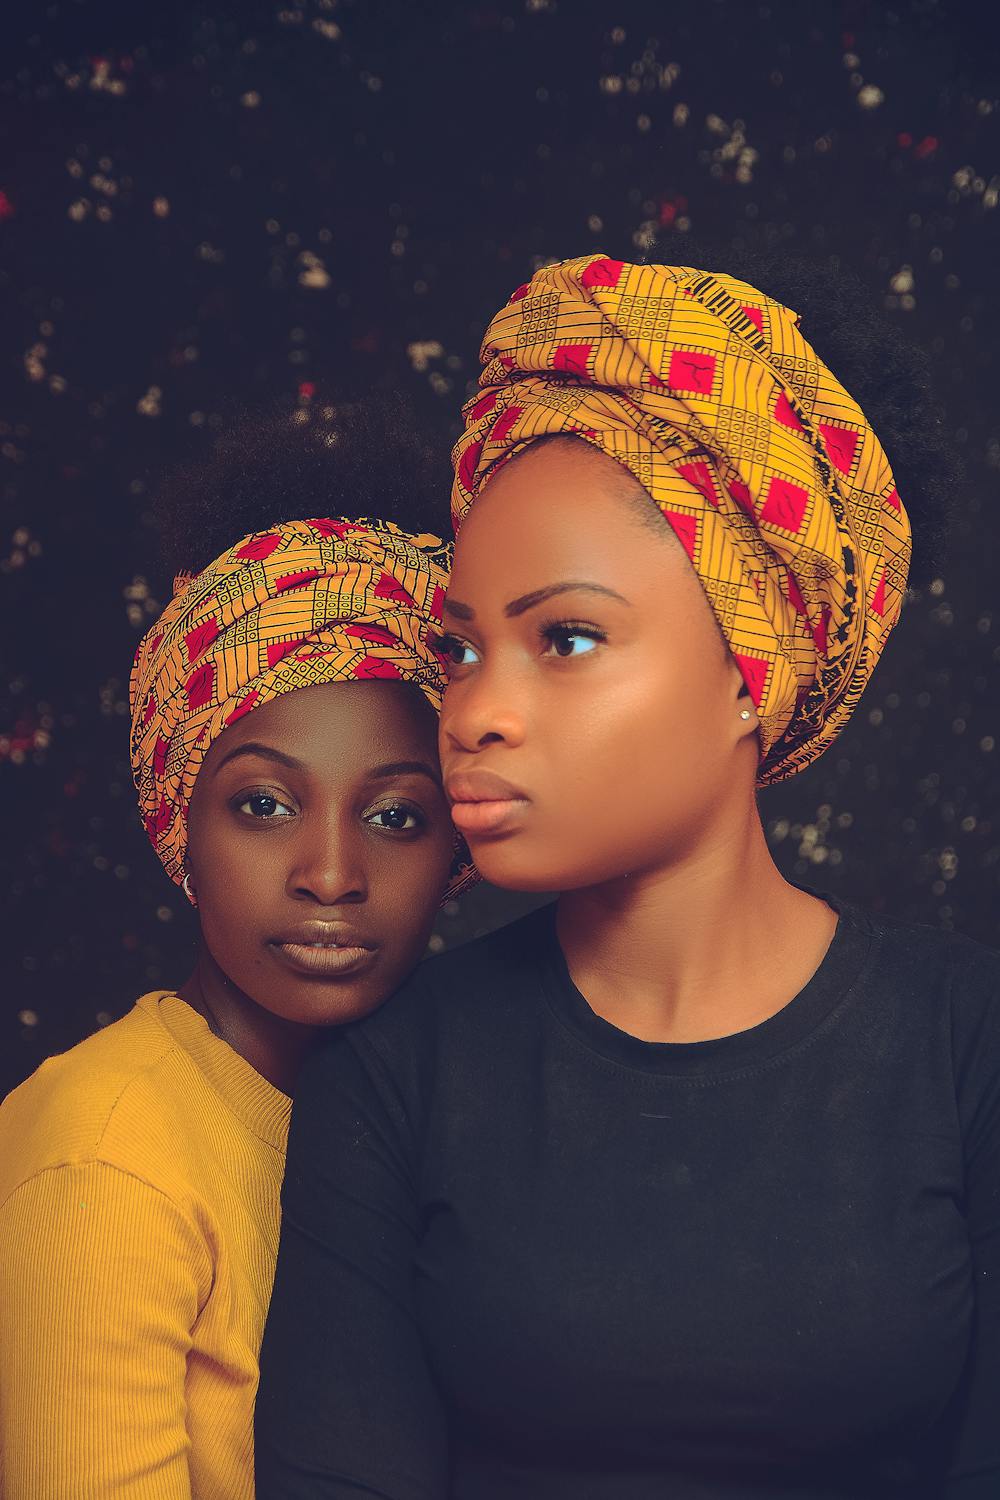 Two Models in Headscarfs · Free Stock Photo